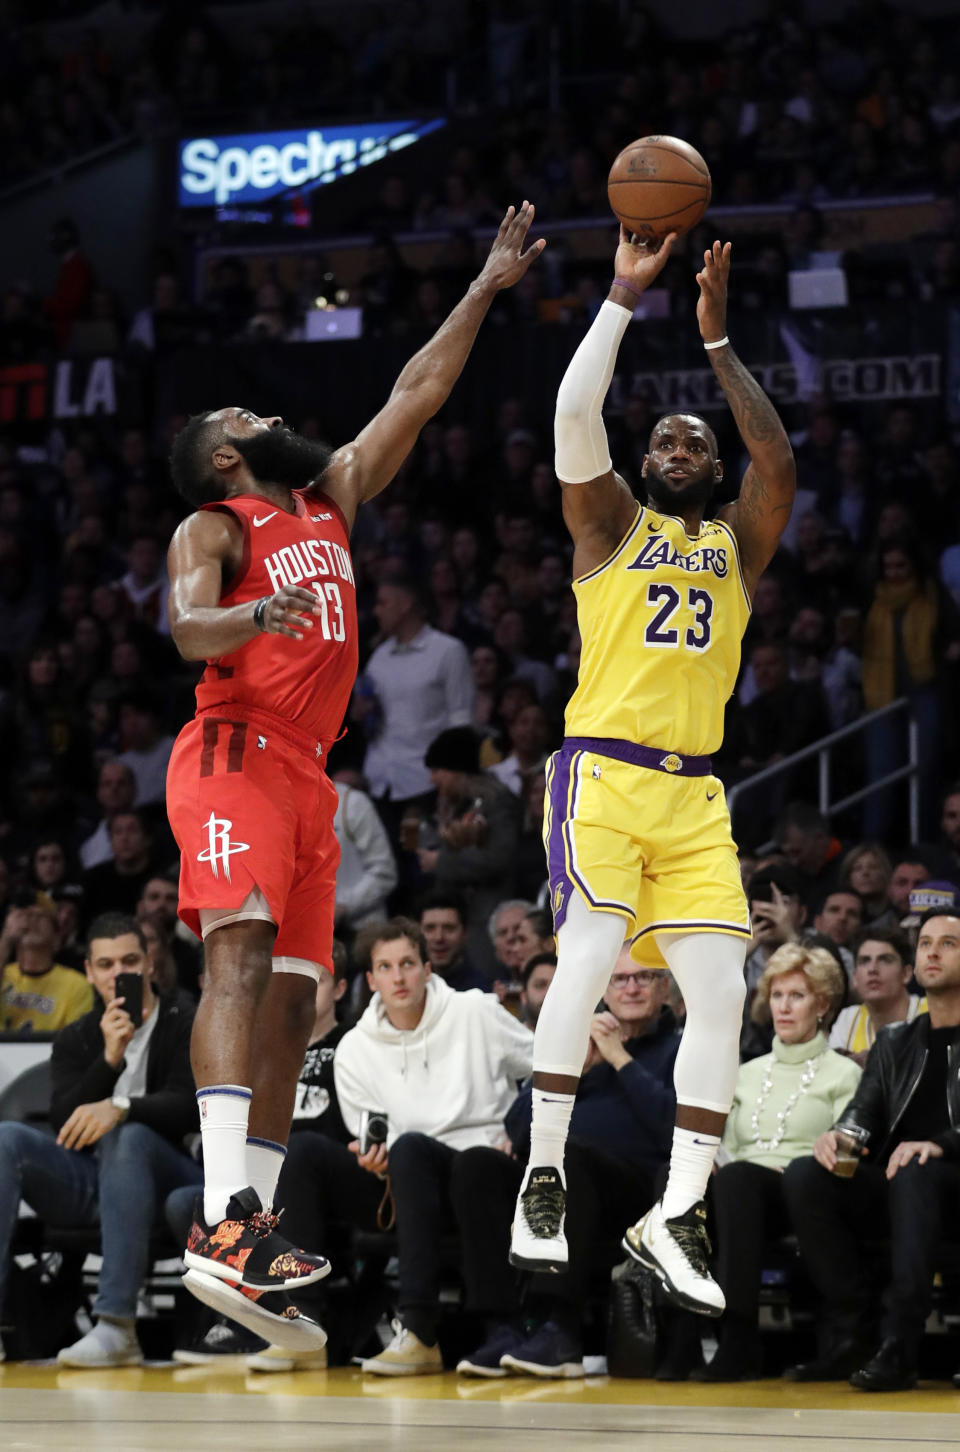 Los Angeles Lakers' LeBron James (23) shoots over Houston Rockets' James Harden during the first half of an NBA basketball game Thursday, Feb. 21, 2019, in Los Angeles. (AP Photo/Marcio Jose Sanchez)